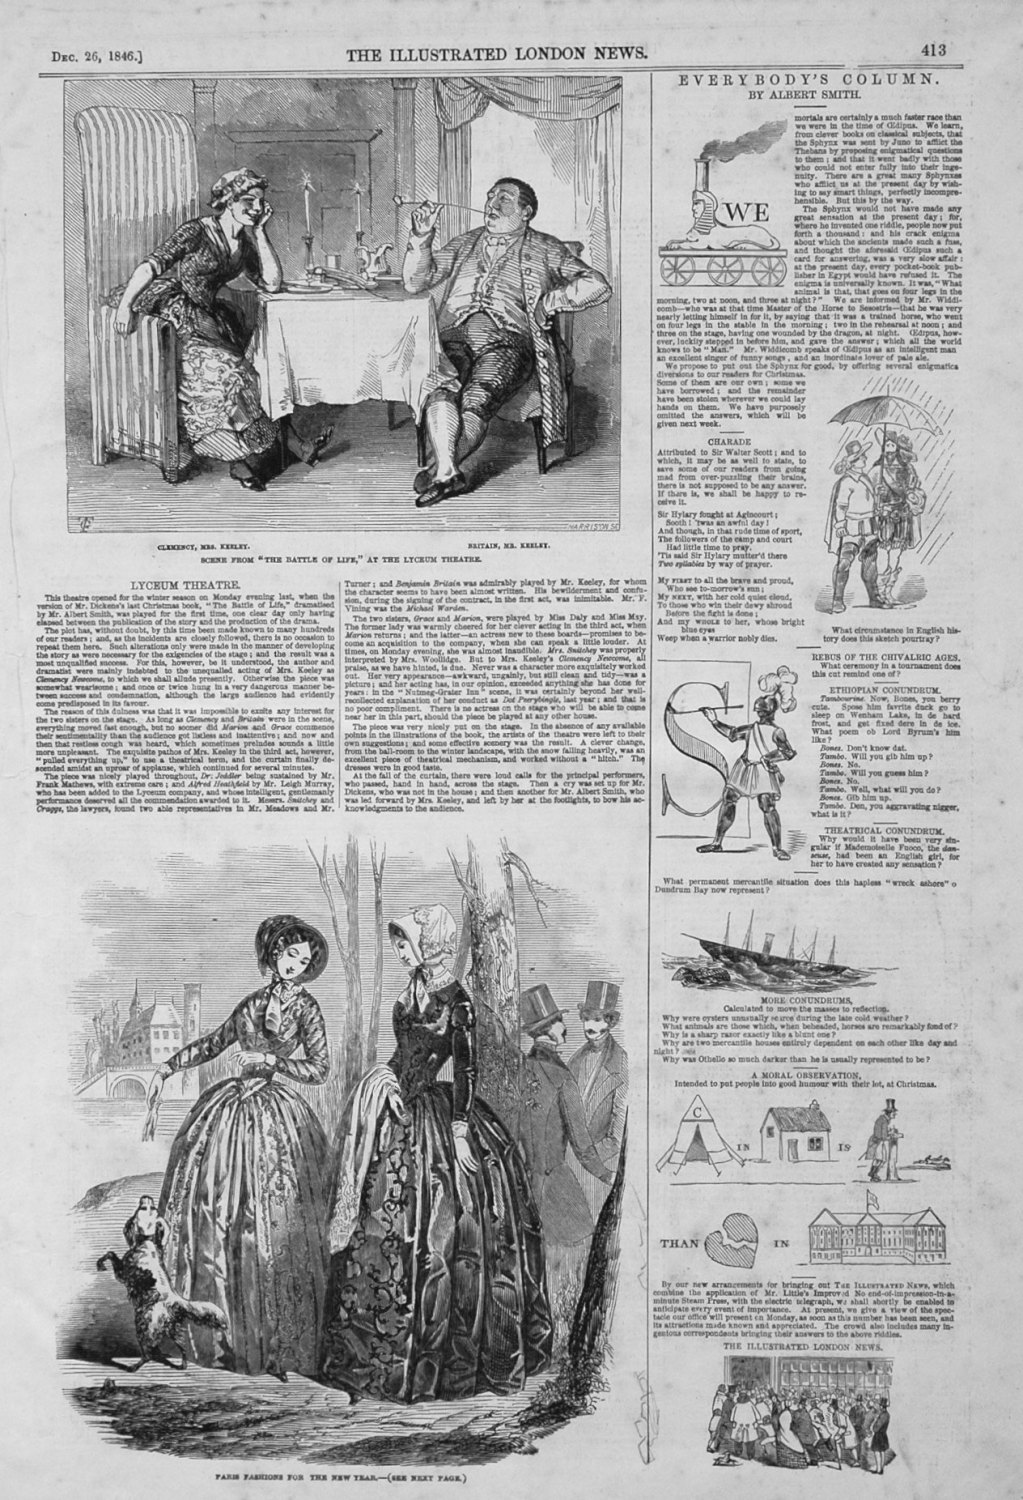 Paris Fashions for the New Year. 1846